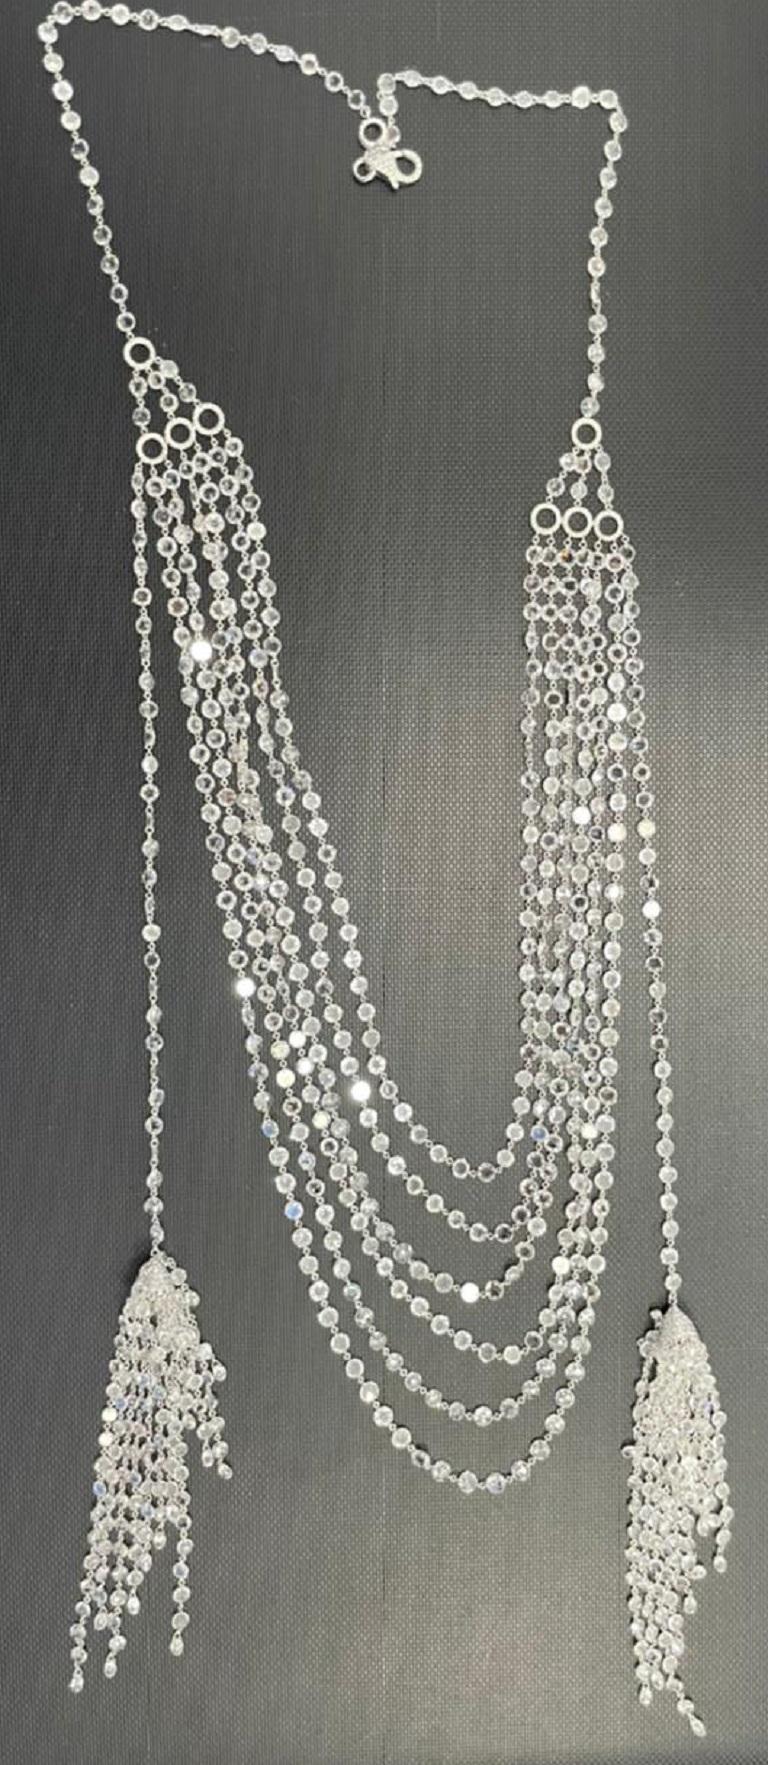 Panim Diamond Rosecut 6 Layered 18K White Gold duo Tassel Necklace

This rose cut diamond tassel necklace has got a personality of its own. It's special, graceful and full of life. Diamond Rose Cut are linked to each other by delicate 18K White gold